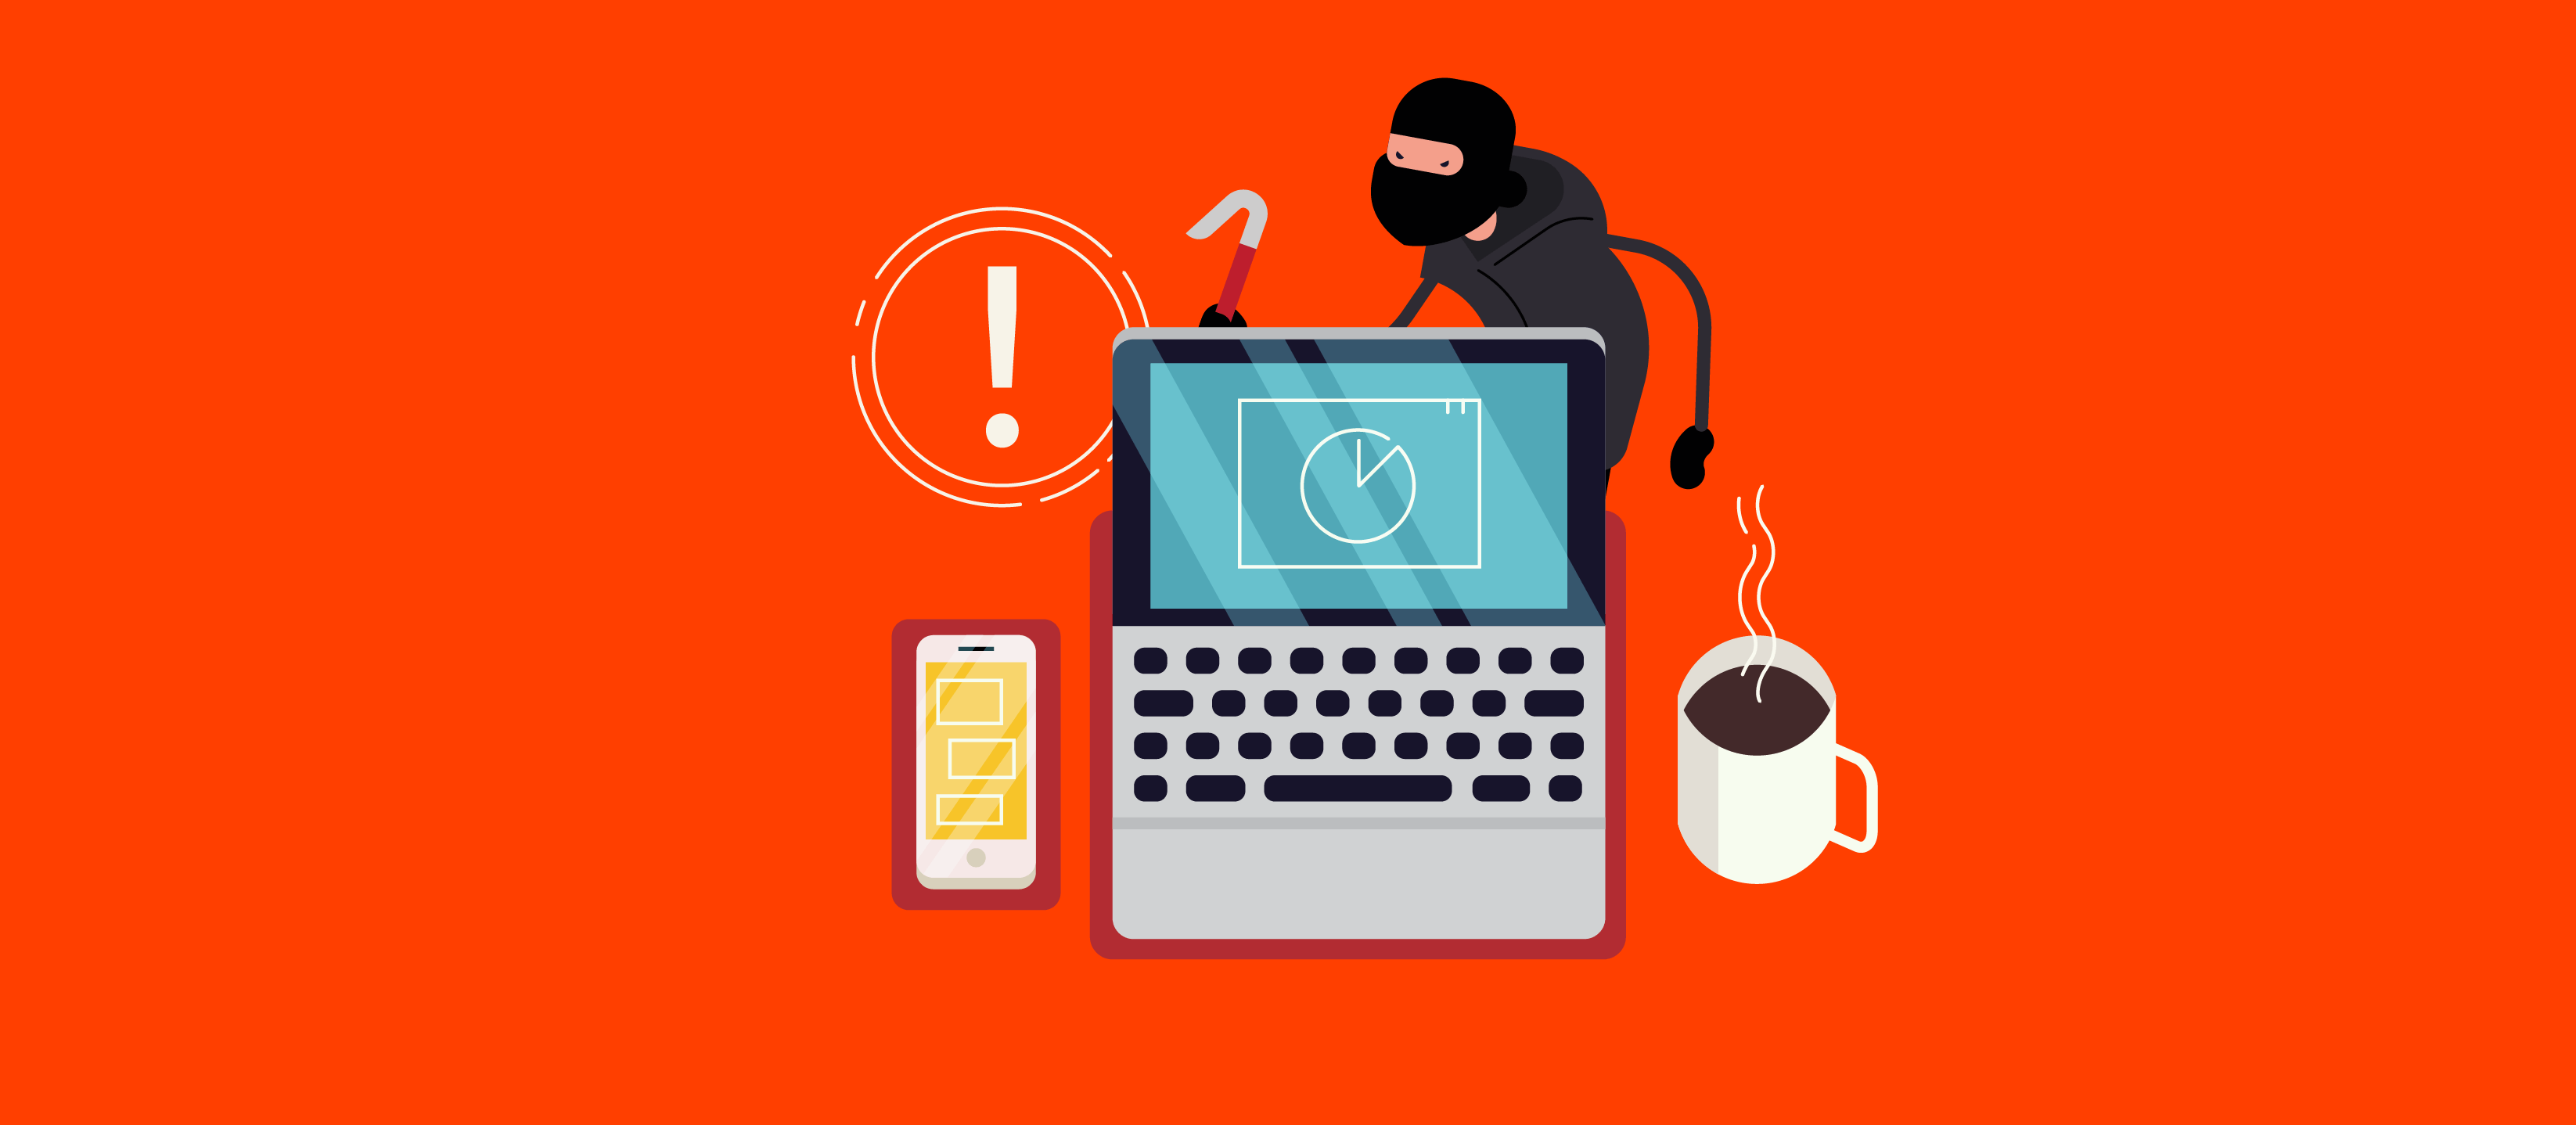 Cybercrime: Which ones are the most common threats today?